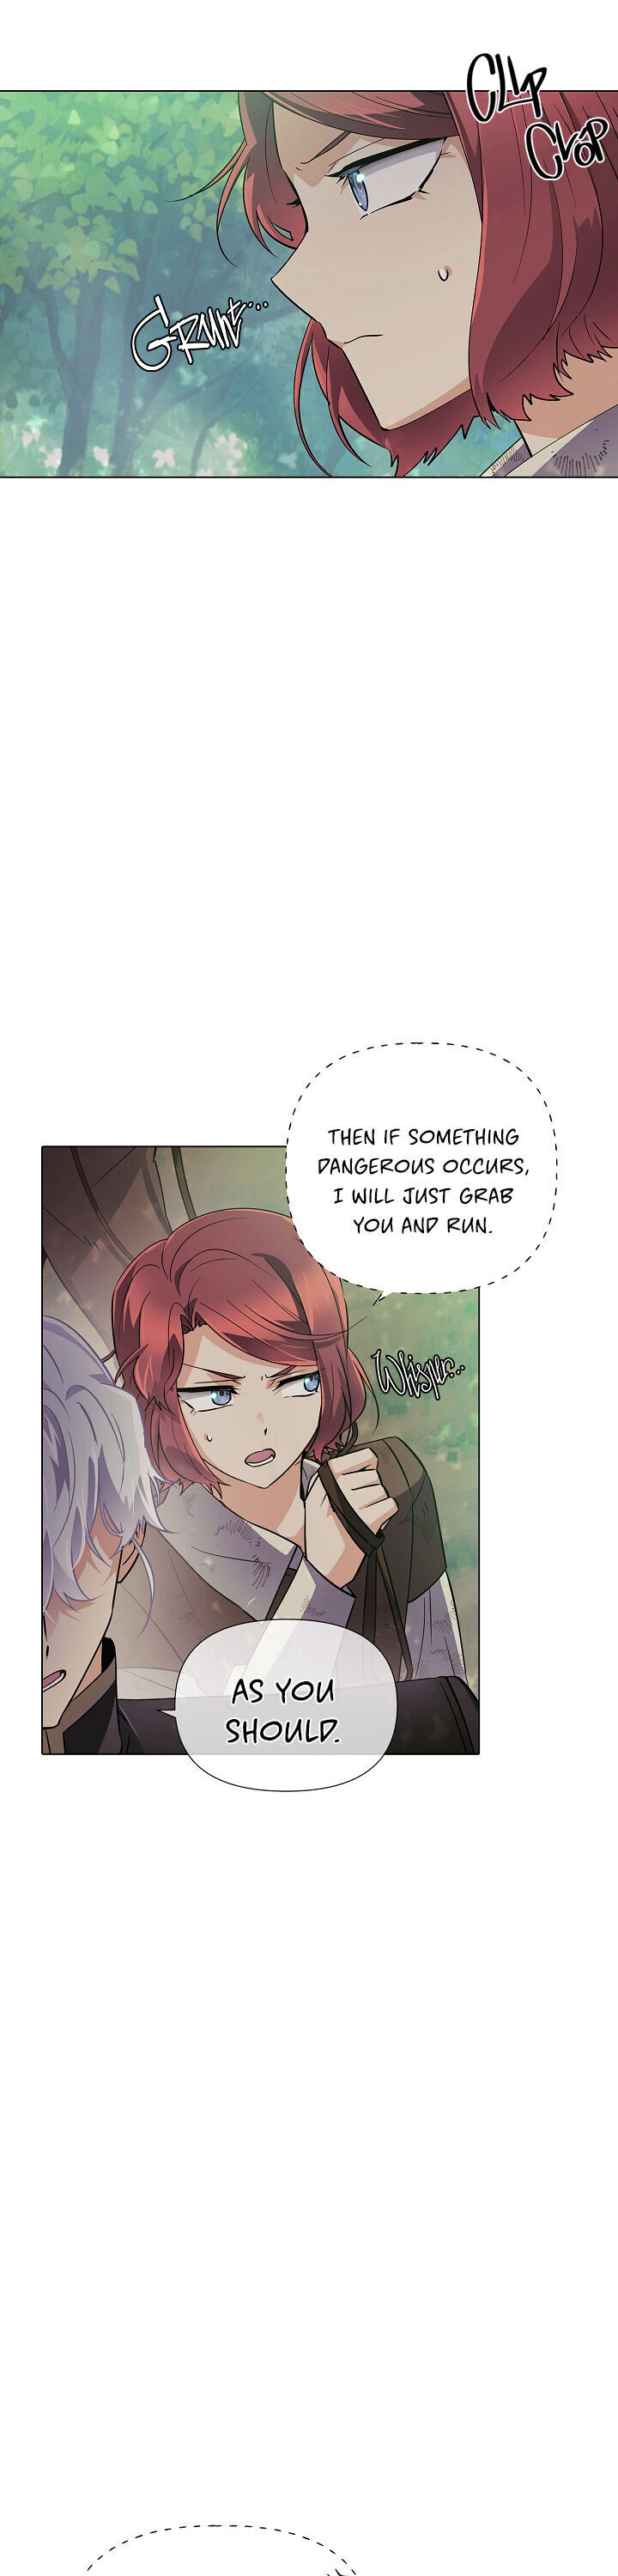 The Villain Discovered My Identity - Chapter 61 Page 21